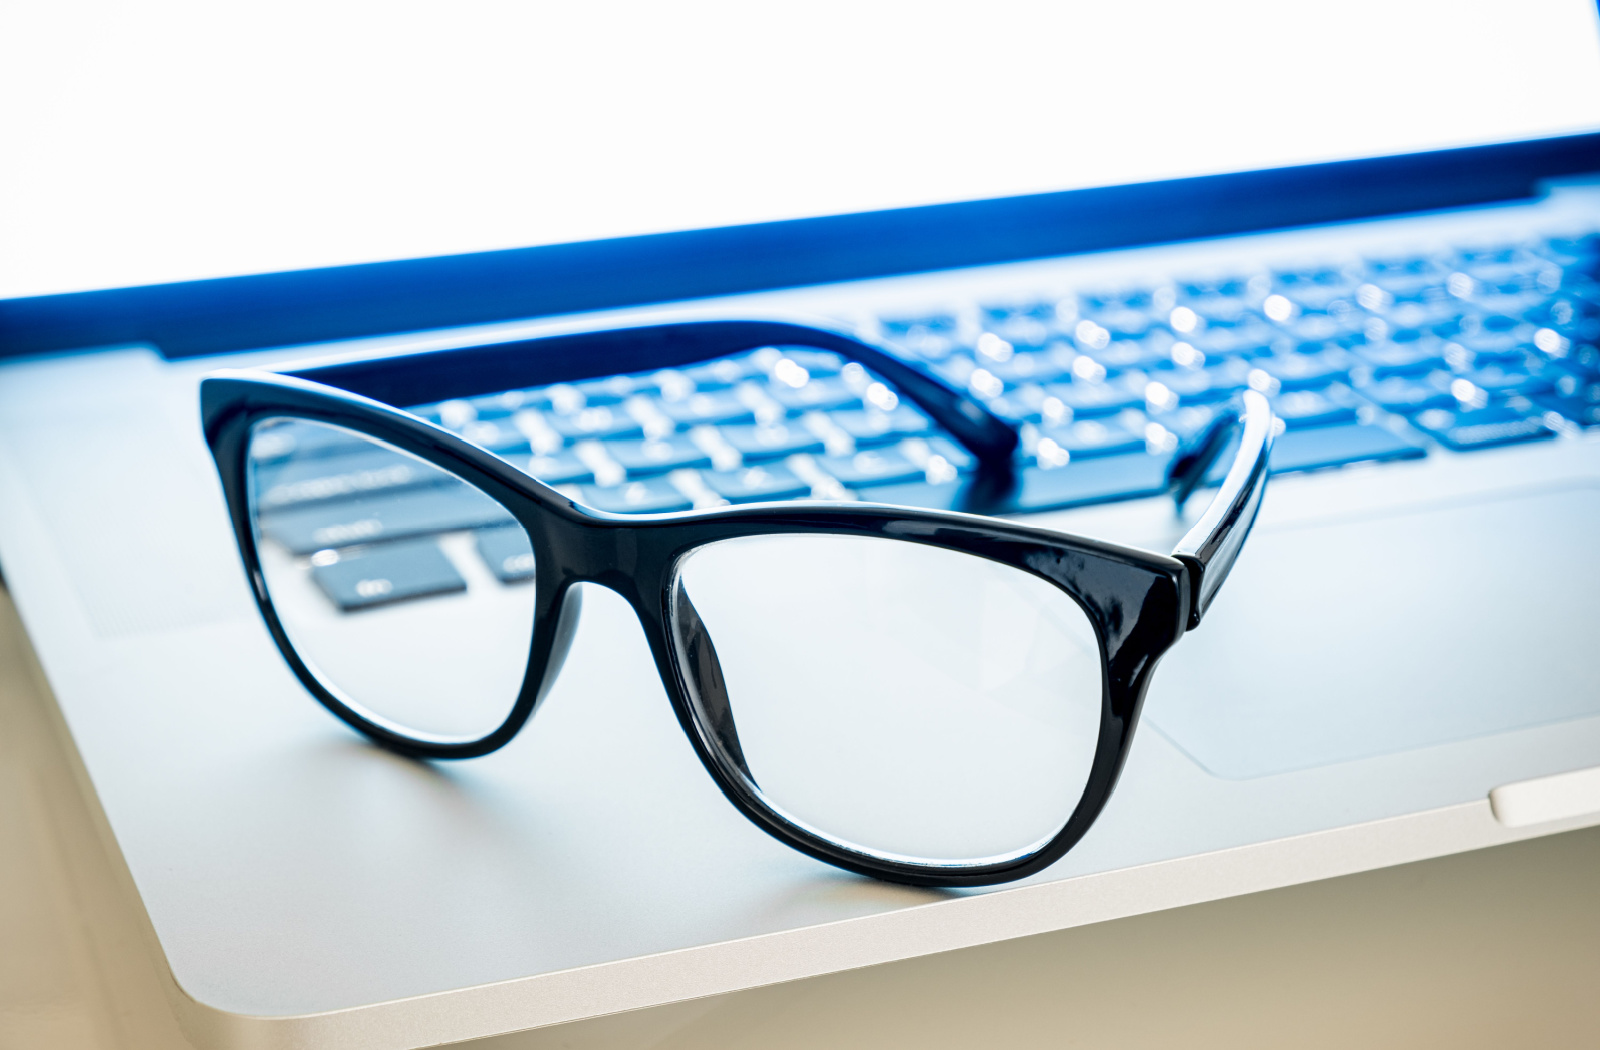 A pair of blue light glasses on an open laptop.